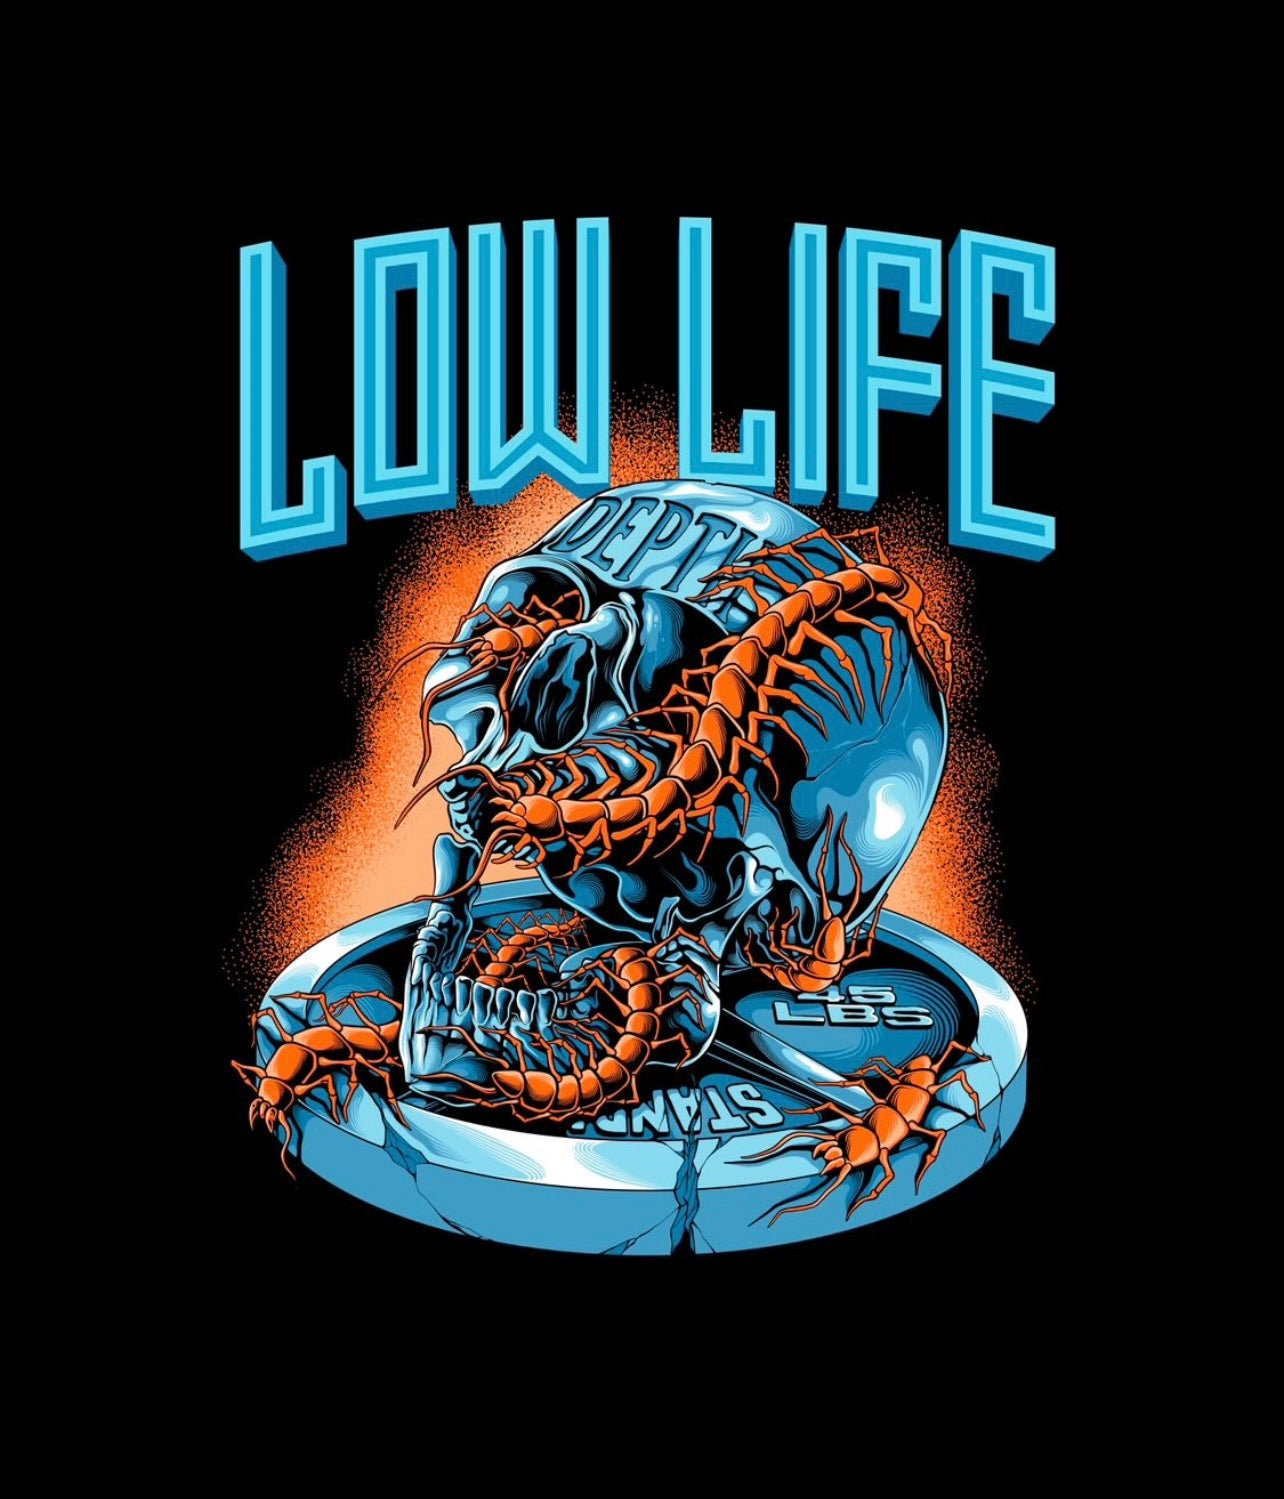 (                                                                                                                       DBDS Low Life- All Legs NoDepth 2.0 (Front Logo)